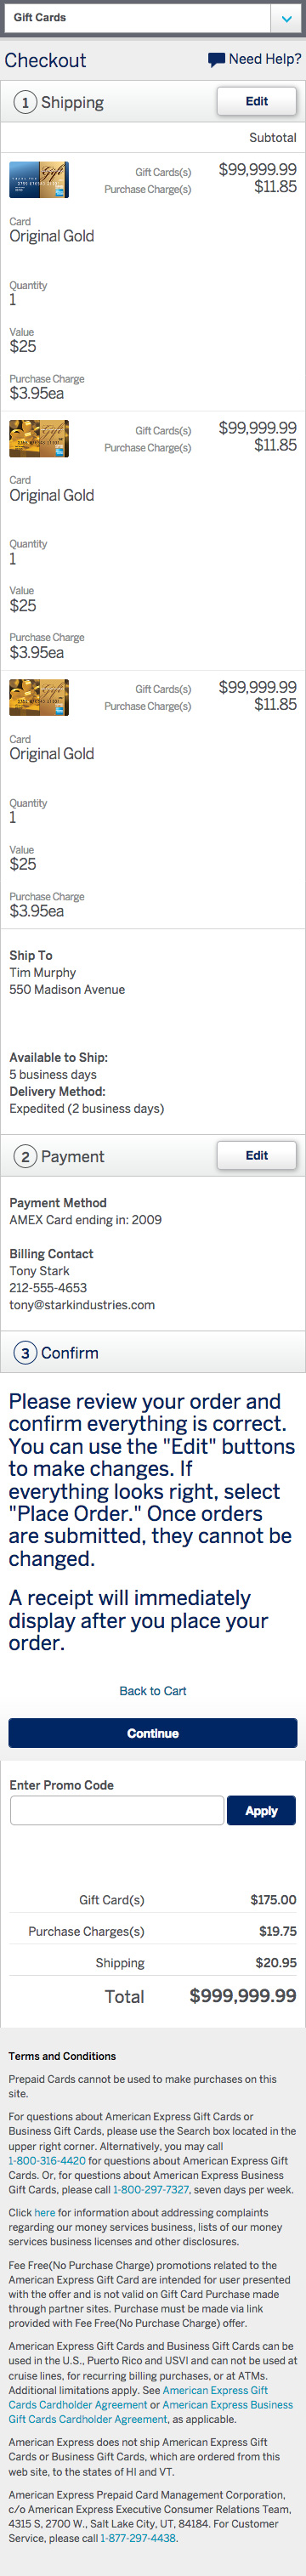 Busines to consumer order confimation for logged in amex cardholders on mobile